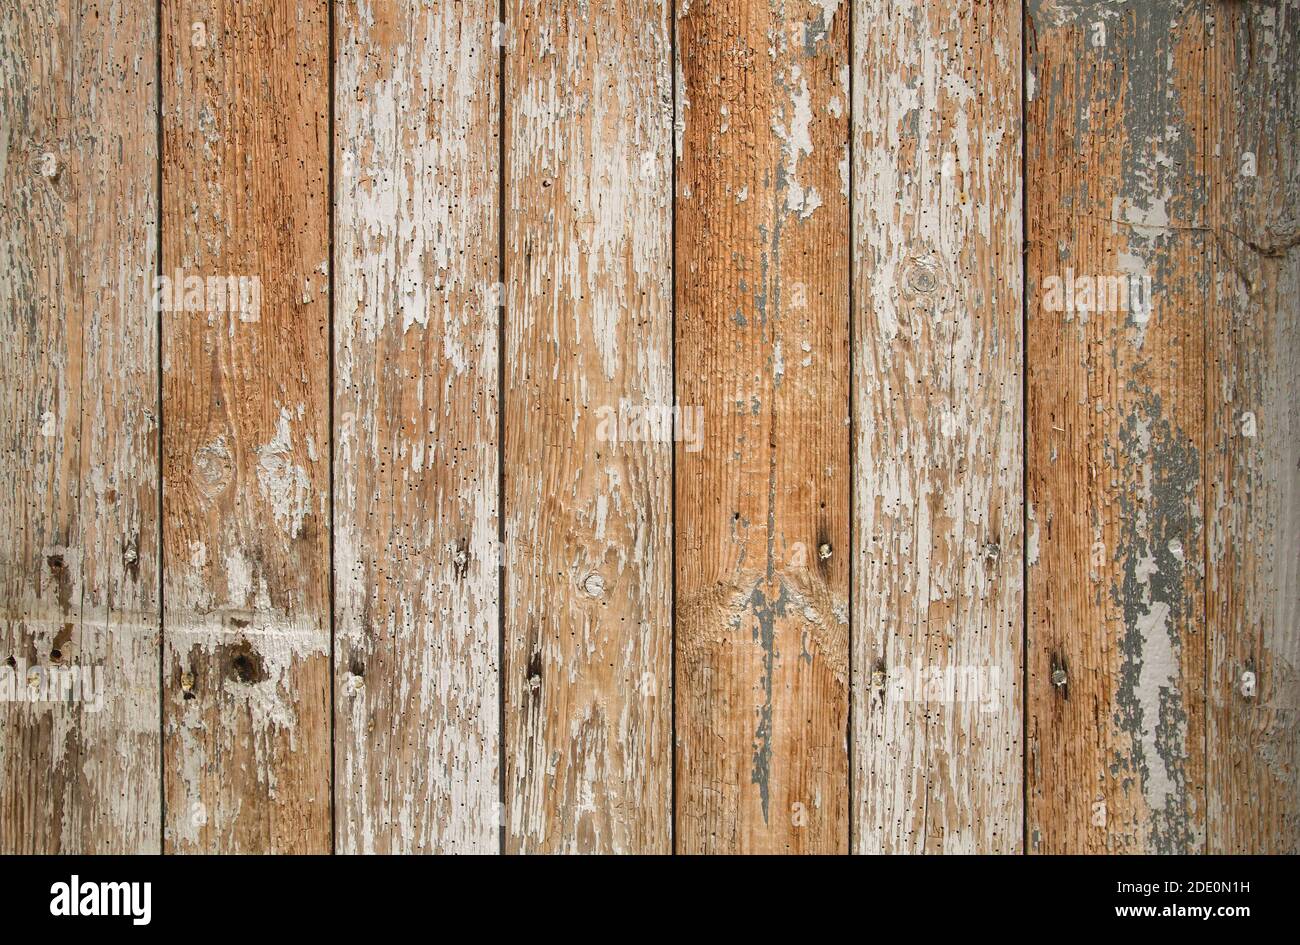 Old rustic wooden wall texure with white peeling paint, grunge background Stock Photo